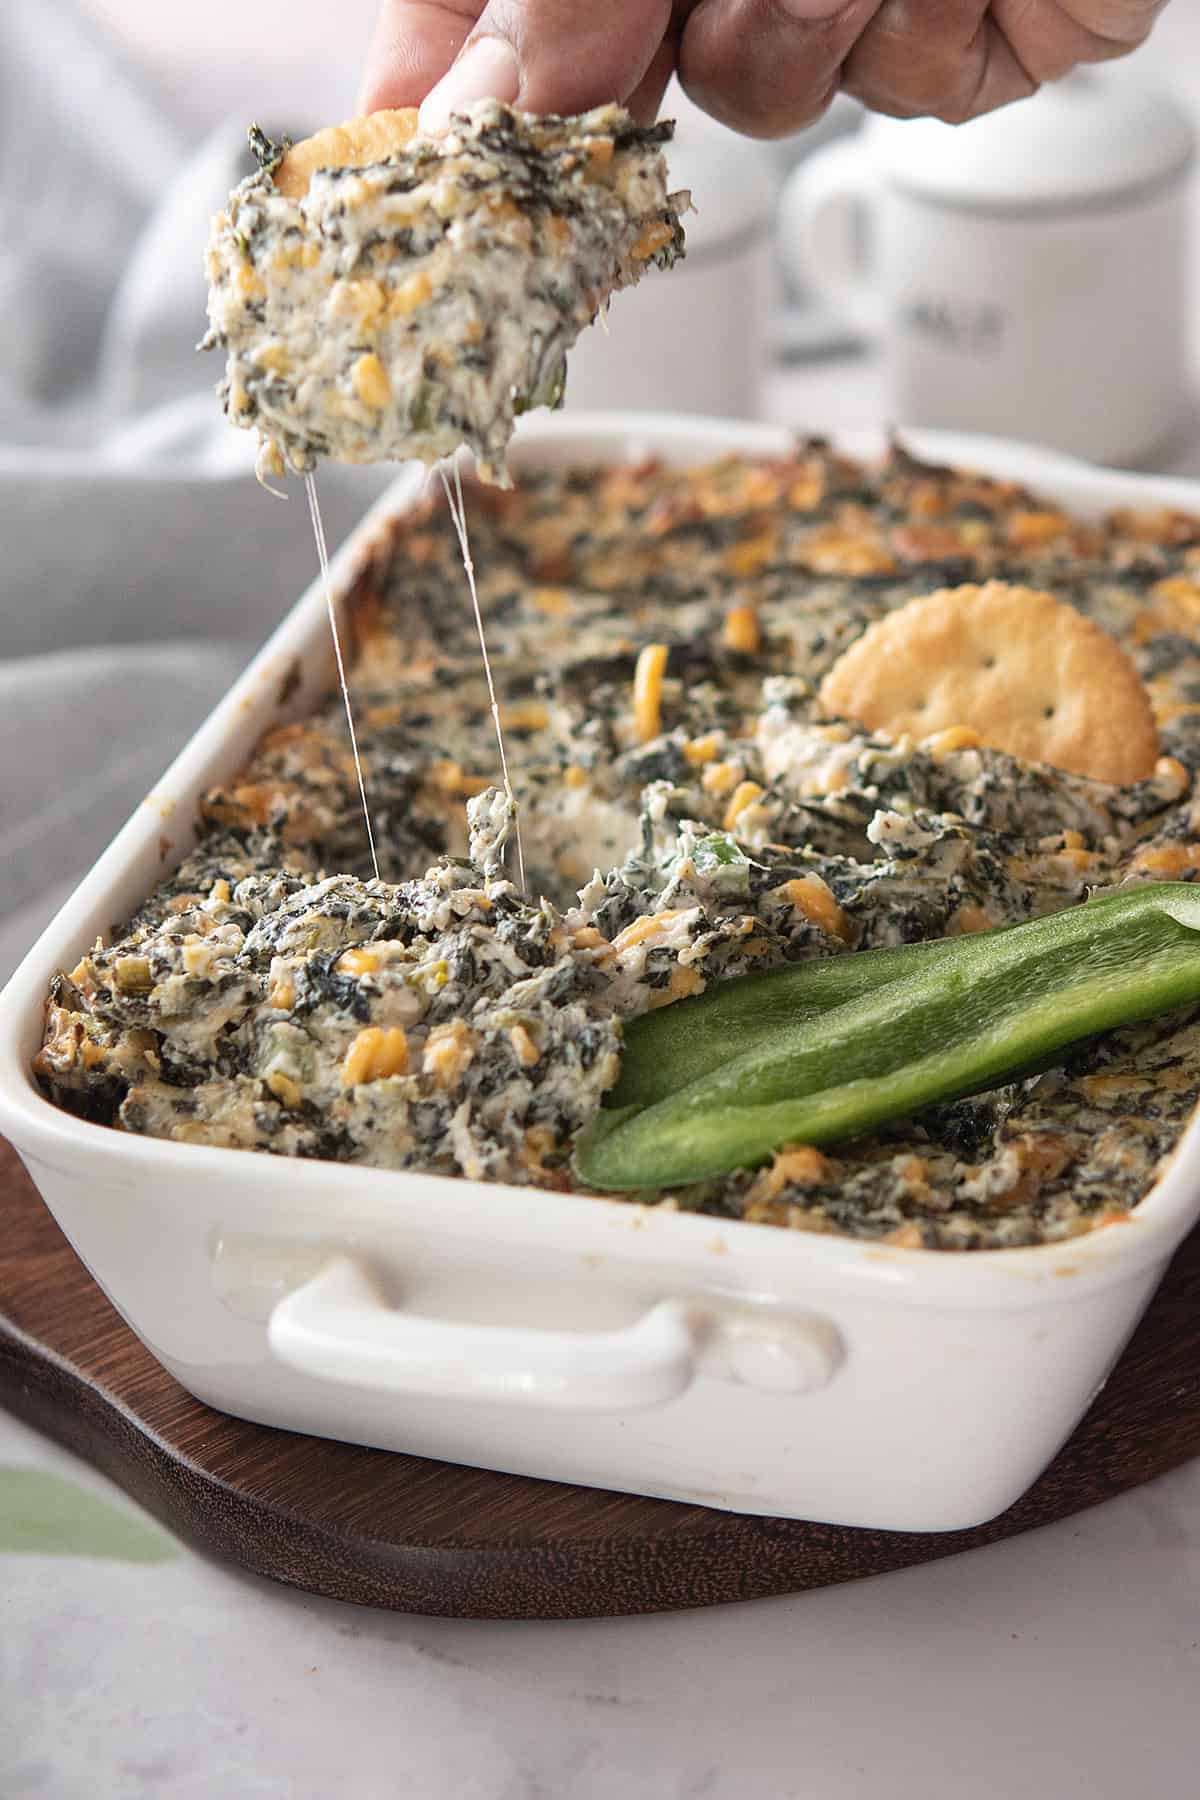 cheese strings from the jalapeno spinach dip while serving